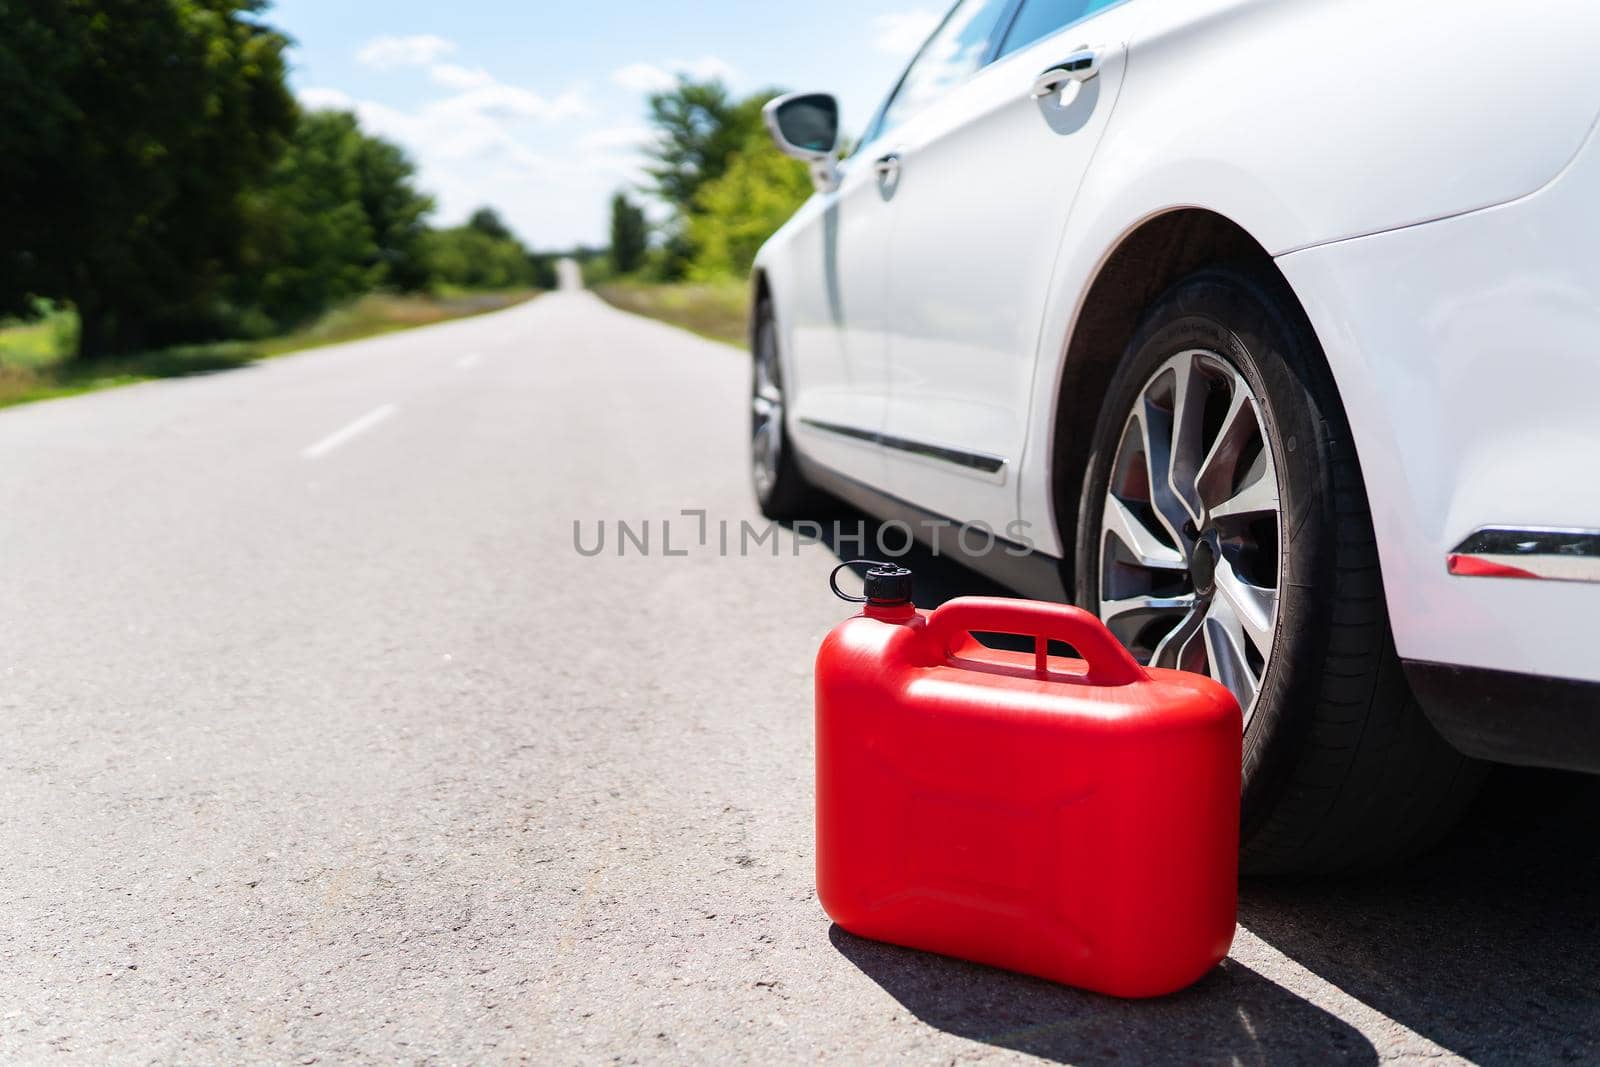 A car parked on the side of the road, an empty red canister. The driver is on the road. Help on the road. Fuel shortage - oil, diesel, gasoline